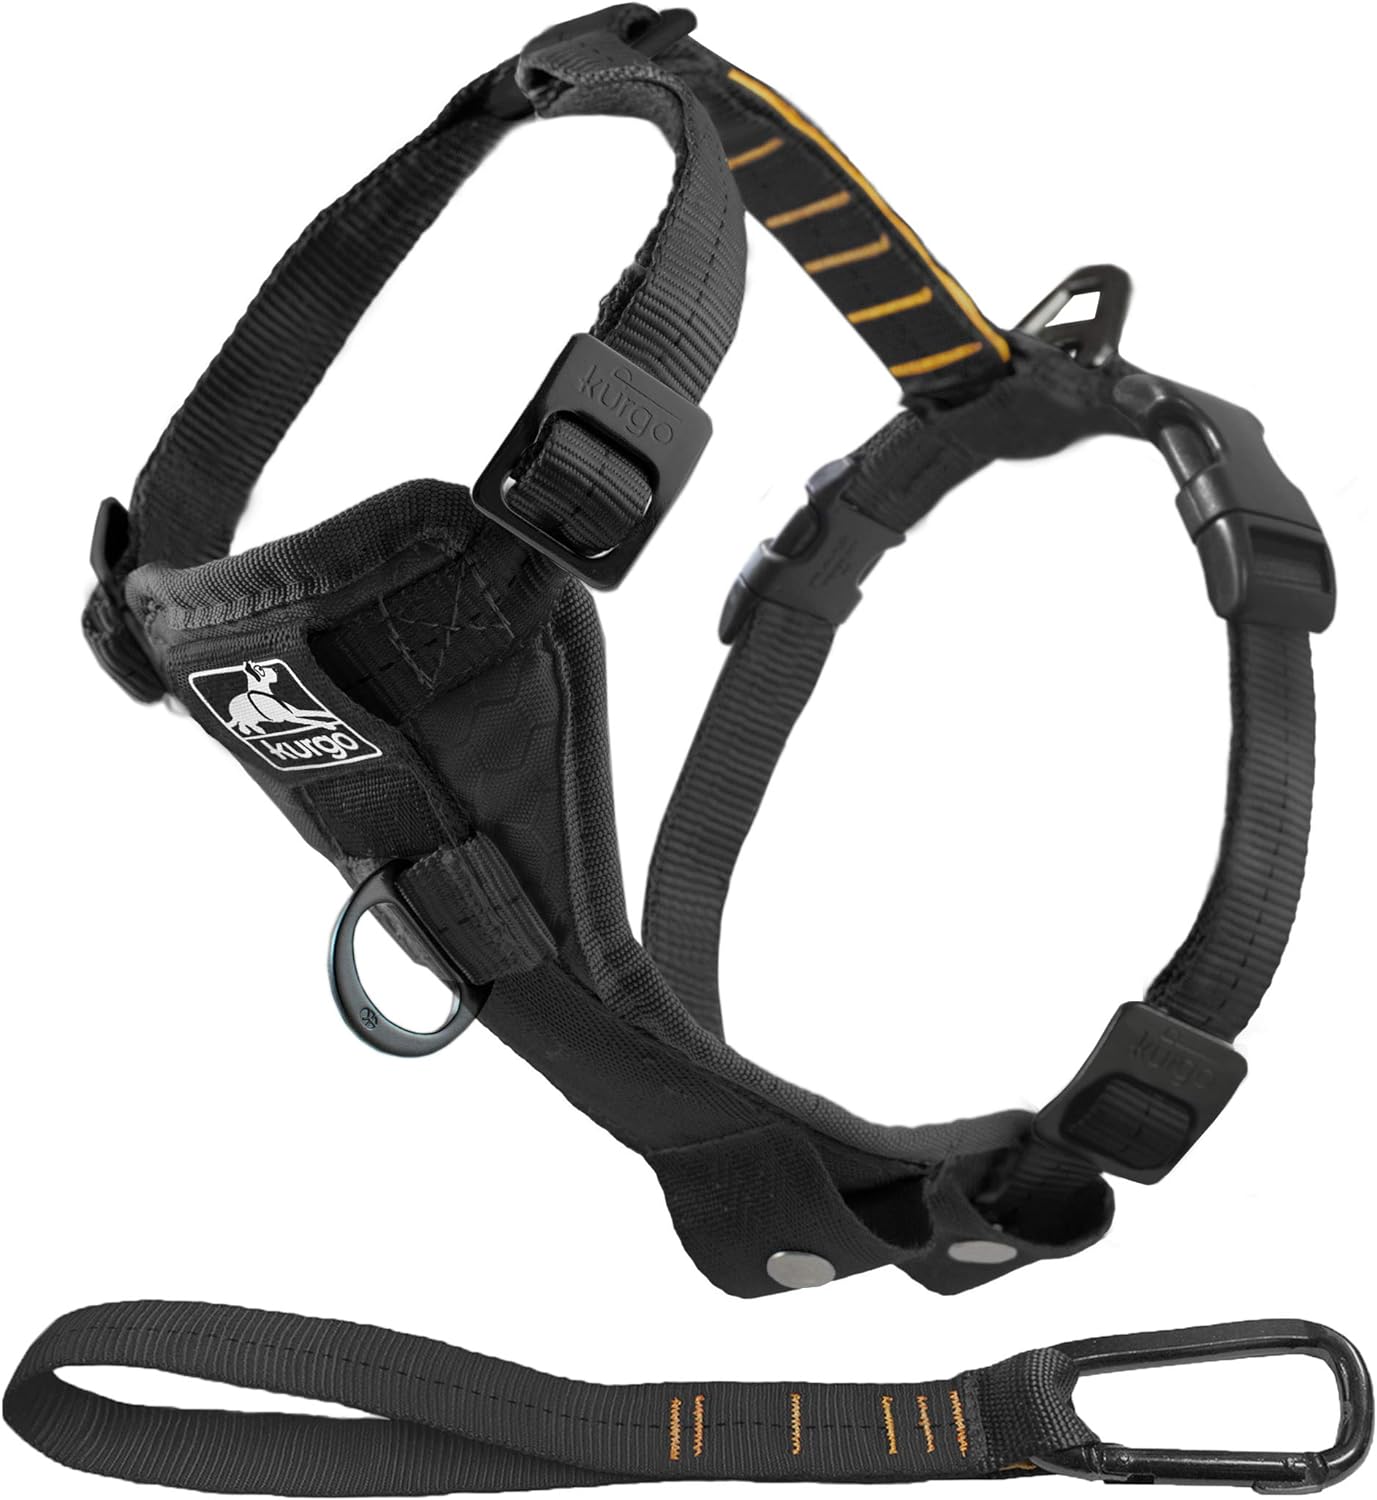 Kurgo Dog Harness | Pet Walking Harness | Extra Large | Black | No Pull Harness Front Clip Feature for Training Included | Car Seat Belt | Tru-Fit Quick Release Style